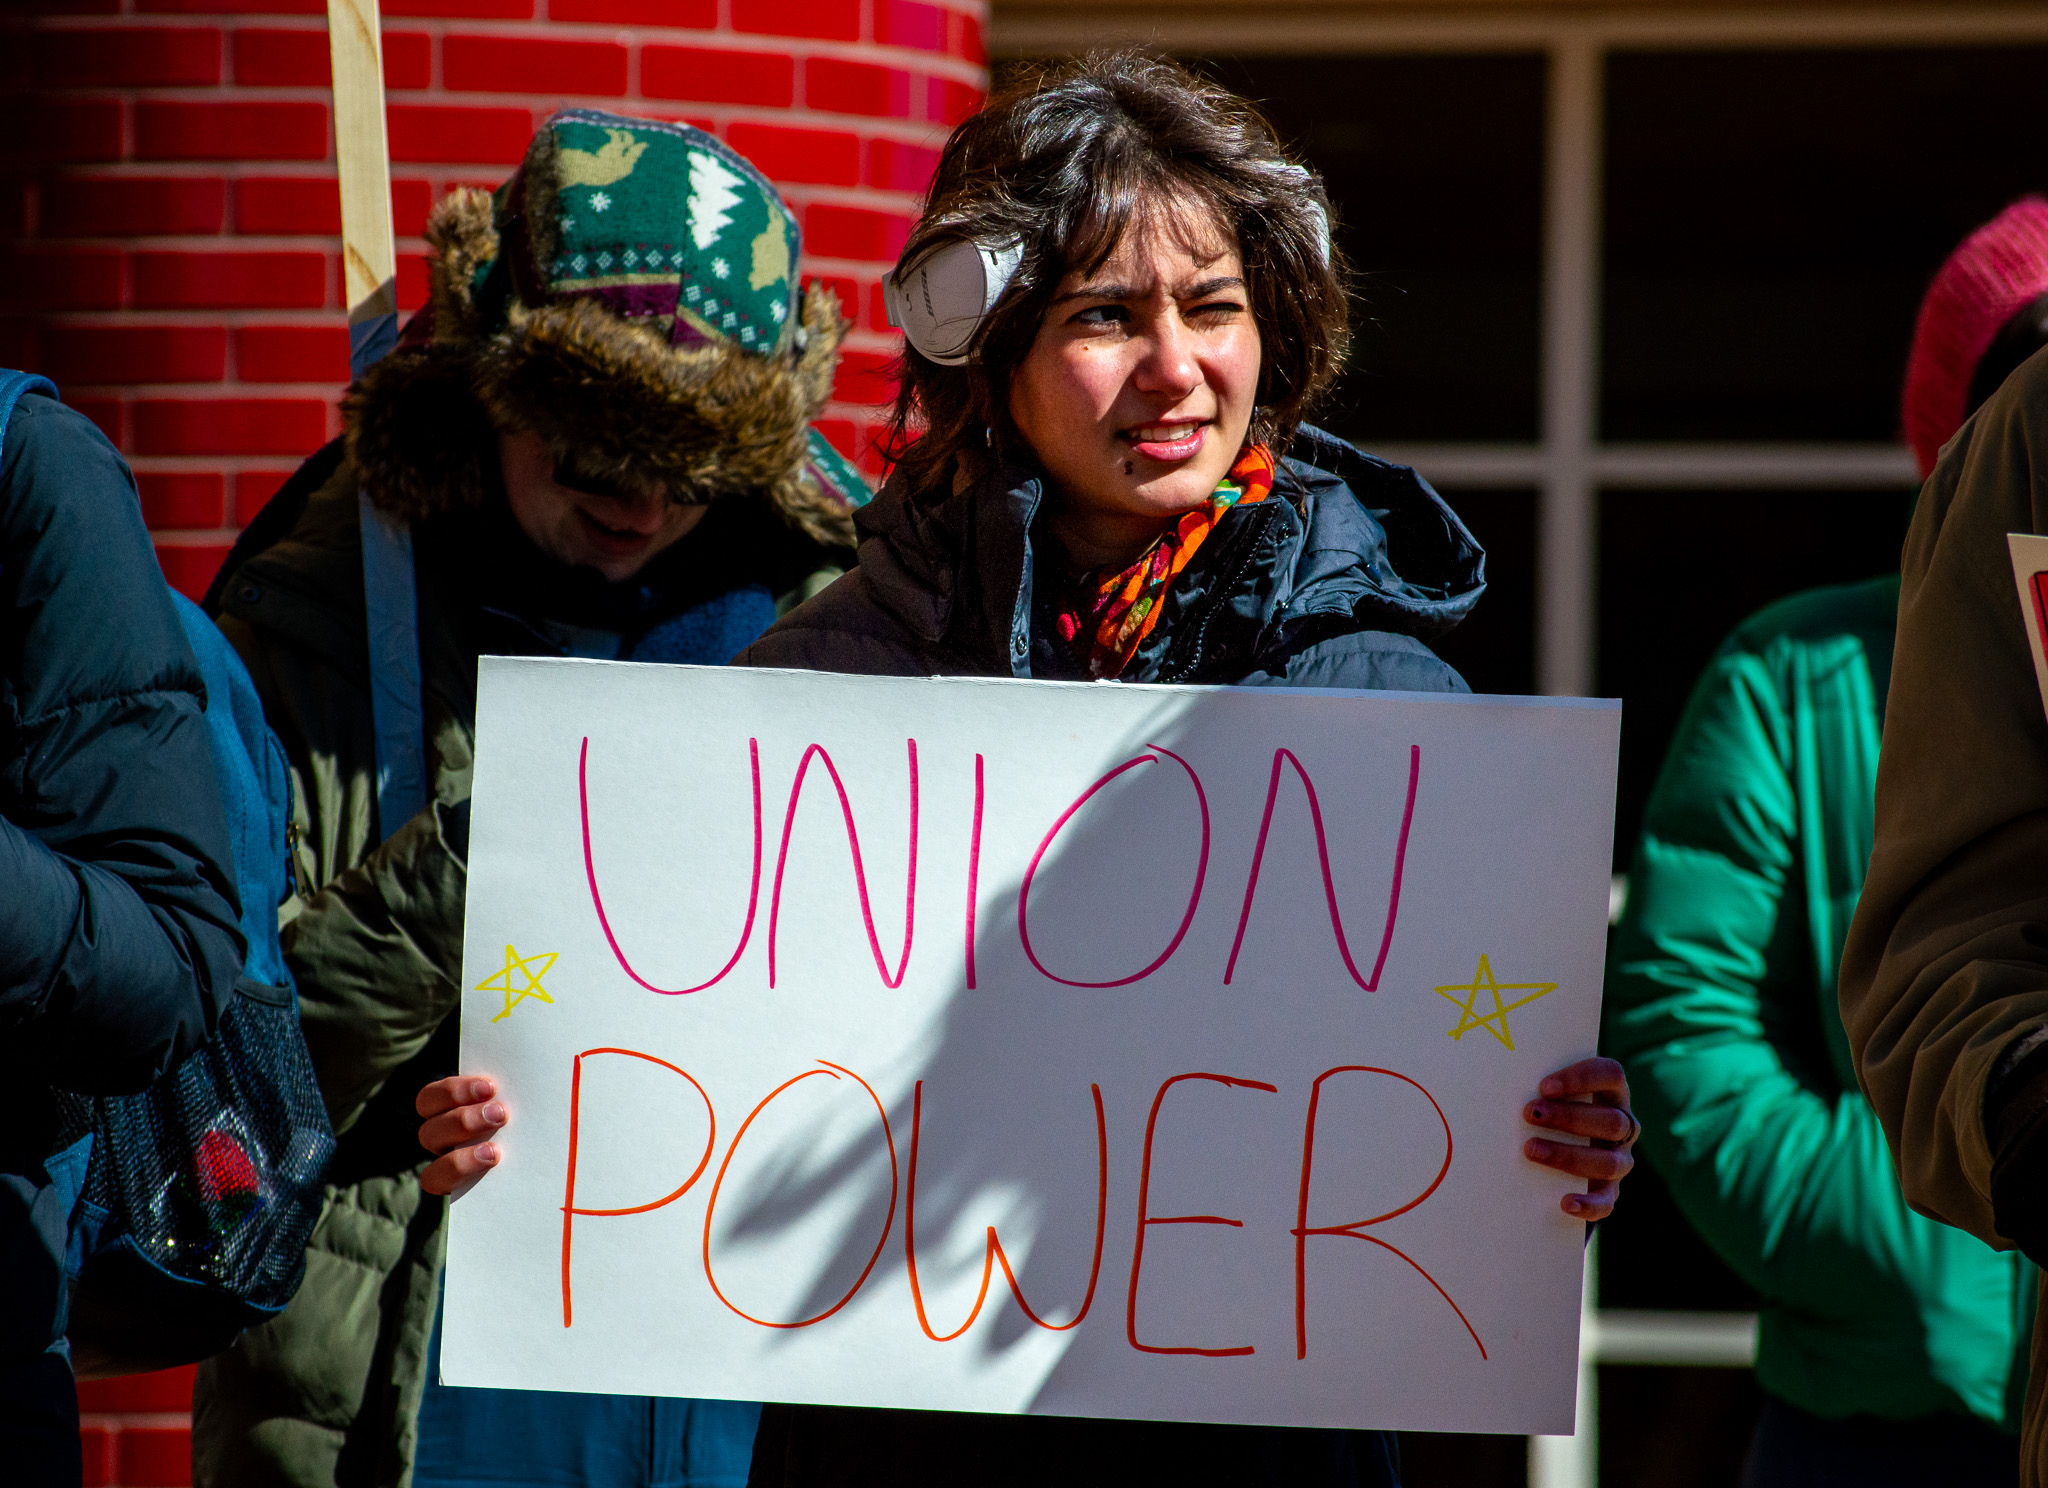 A photograph of a Grinnell student holding a sign that says "Union Power""